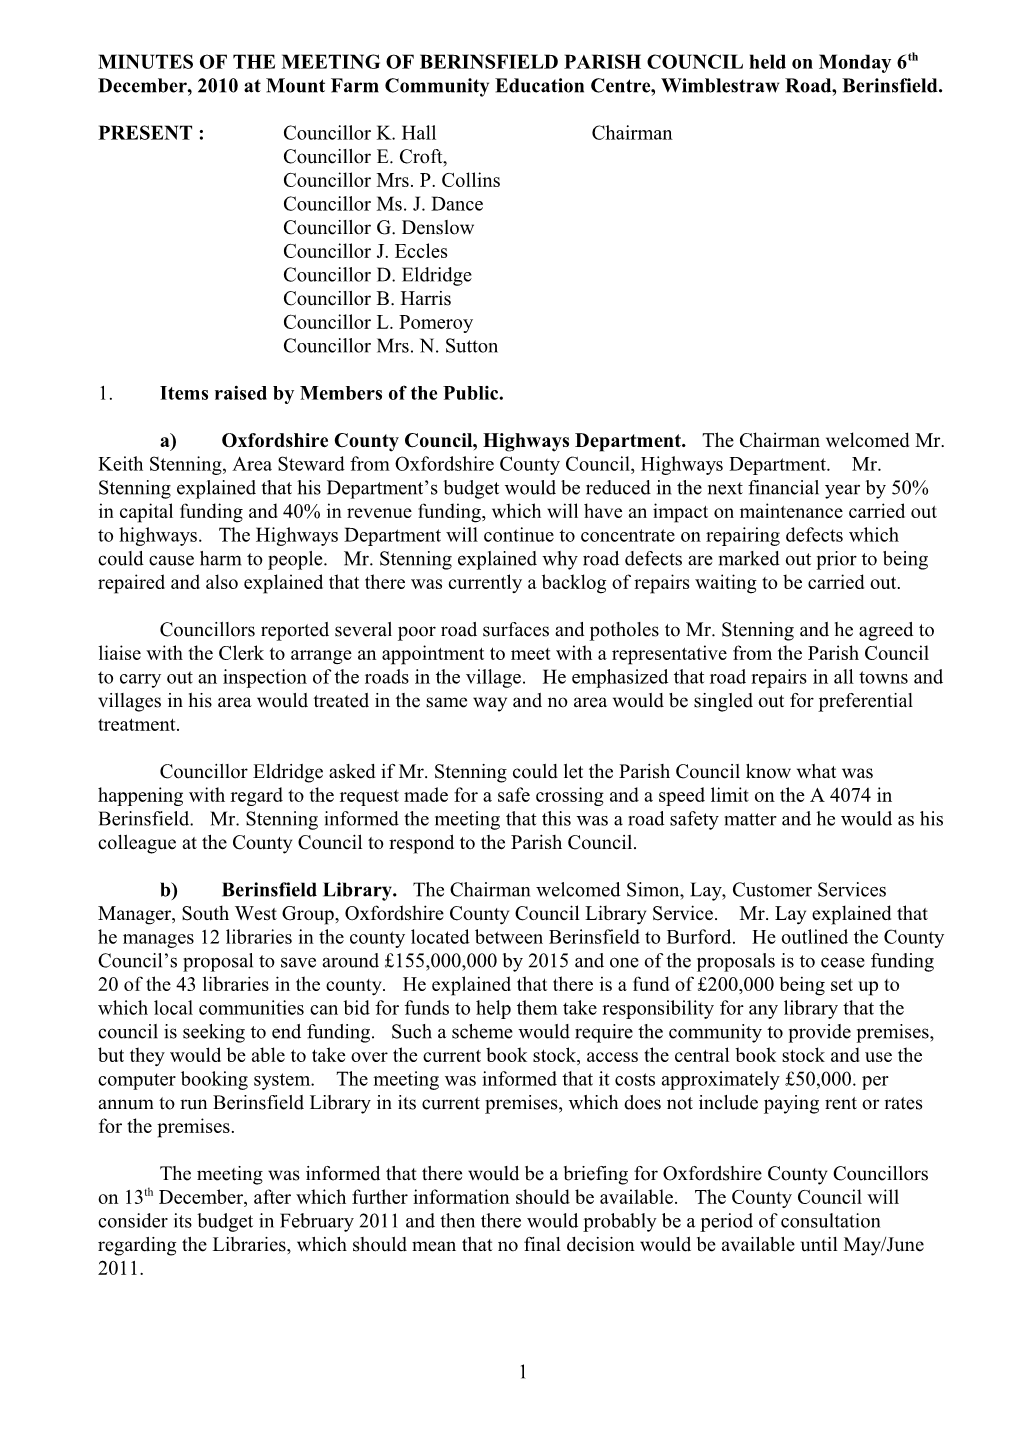 MINUTES of the MEETING of BERINSFIELD PARISH COUNCIL Held on Monday 1St March 2010 at Mount s1